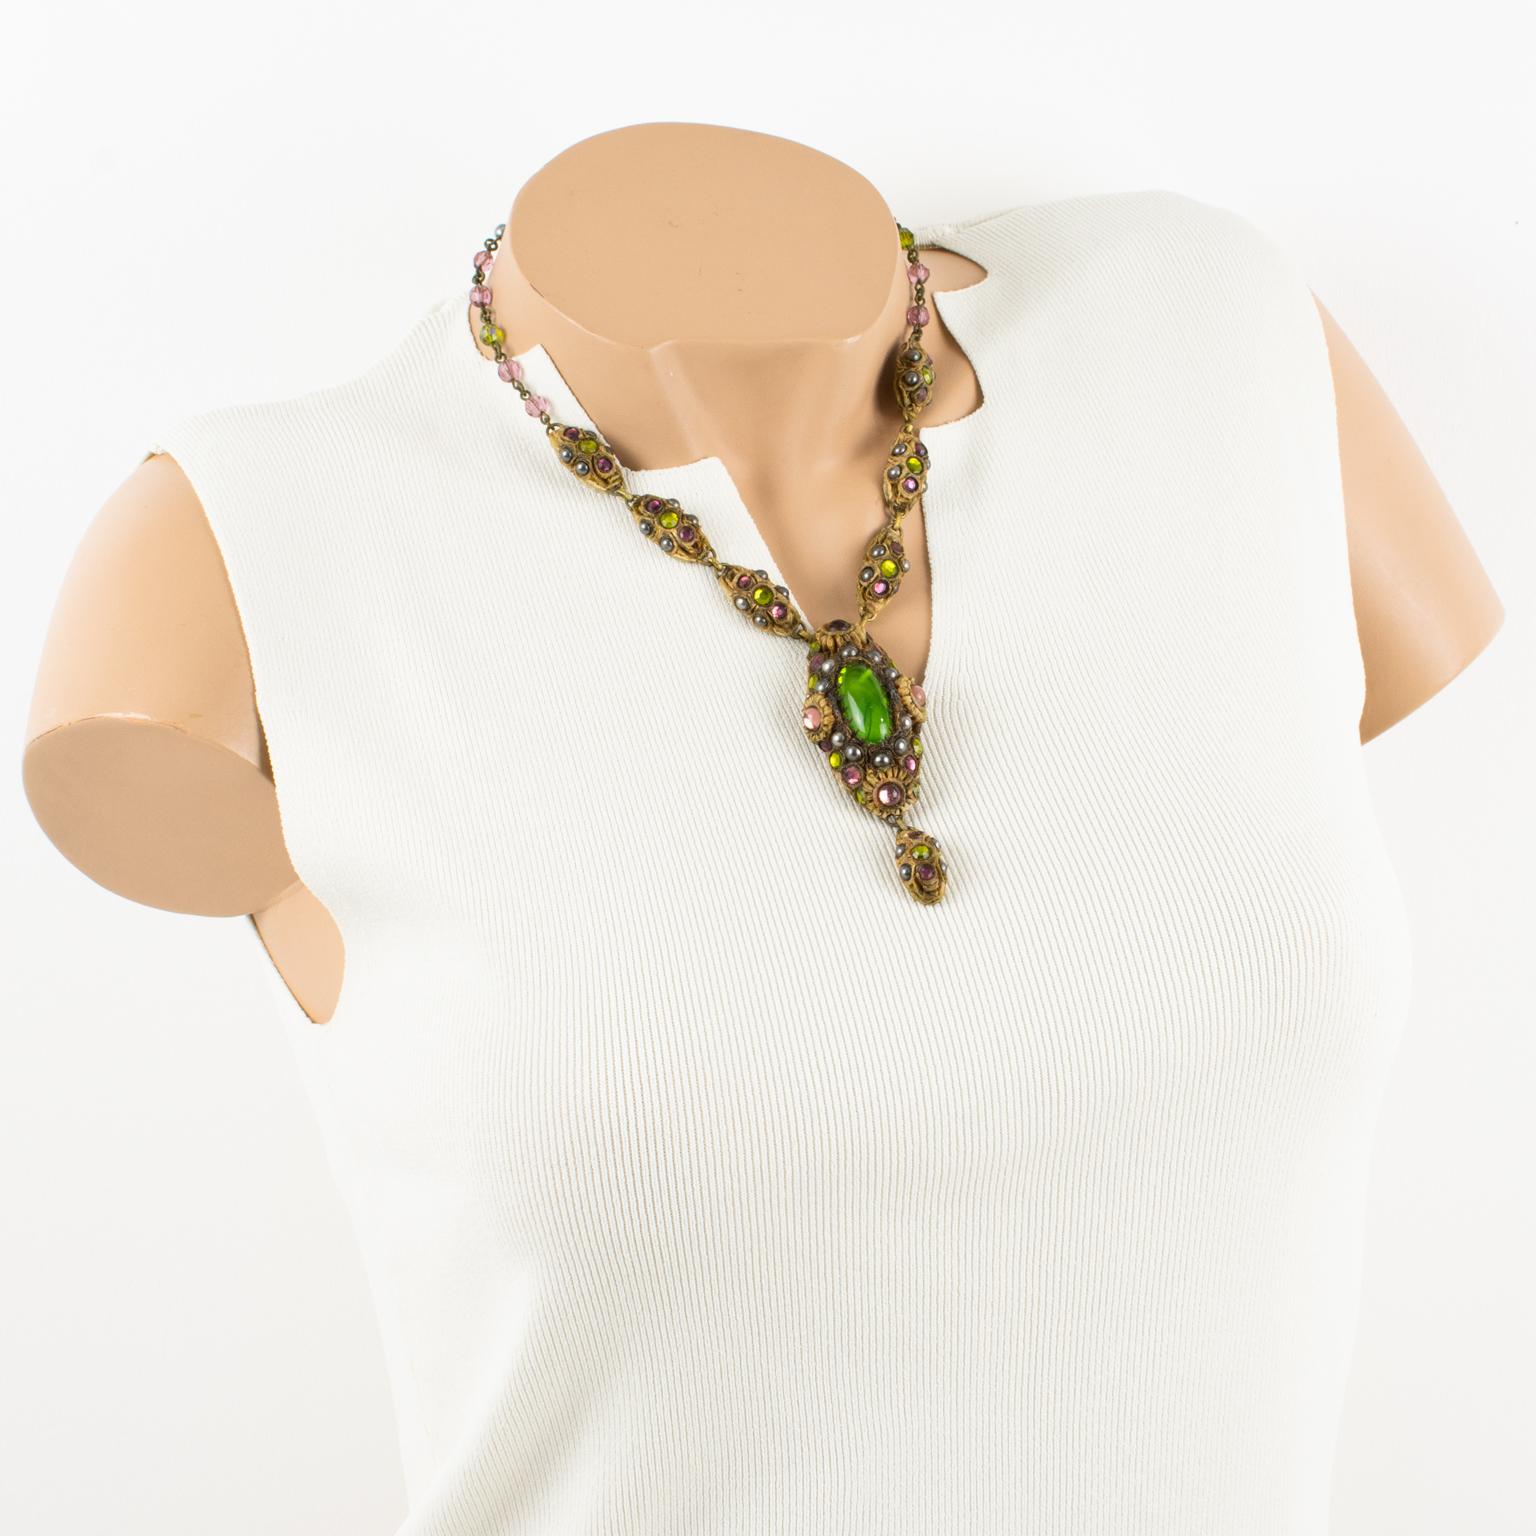 French jewelry artist Henry Perichon (aka Henry) designed this gorgeous Talosel resin necklace in the 1960s. The choker features brown-beige Talosel resin oval pendants topped with black pearl-like beads and purple and green poured glass cabochons.